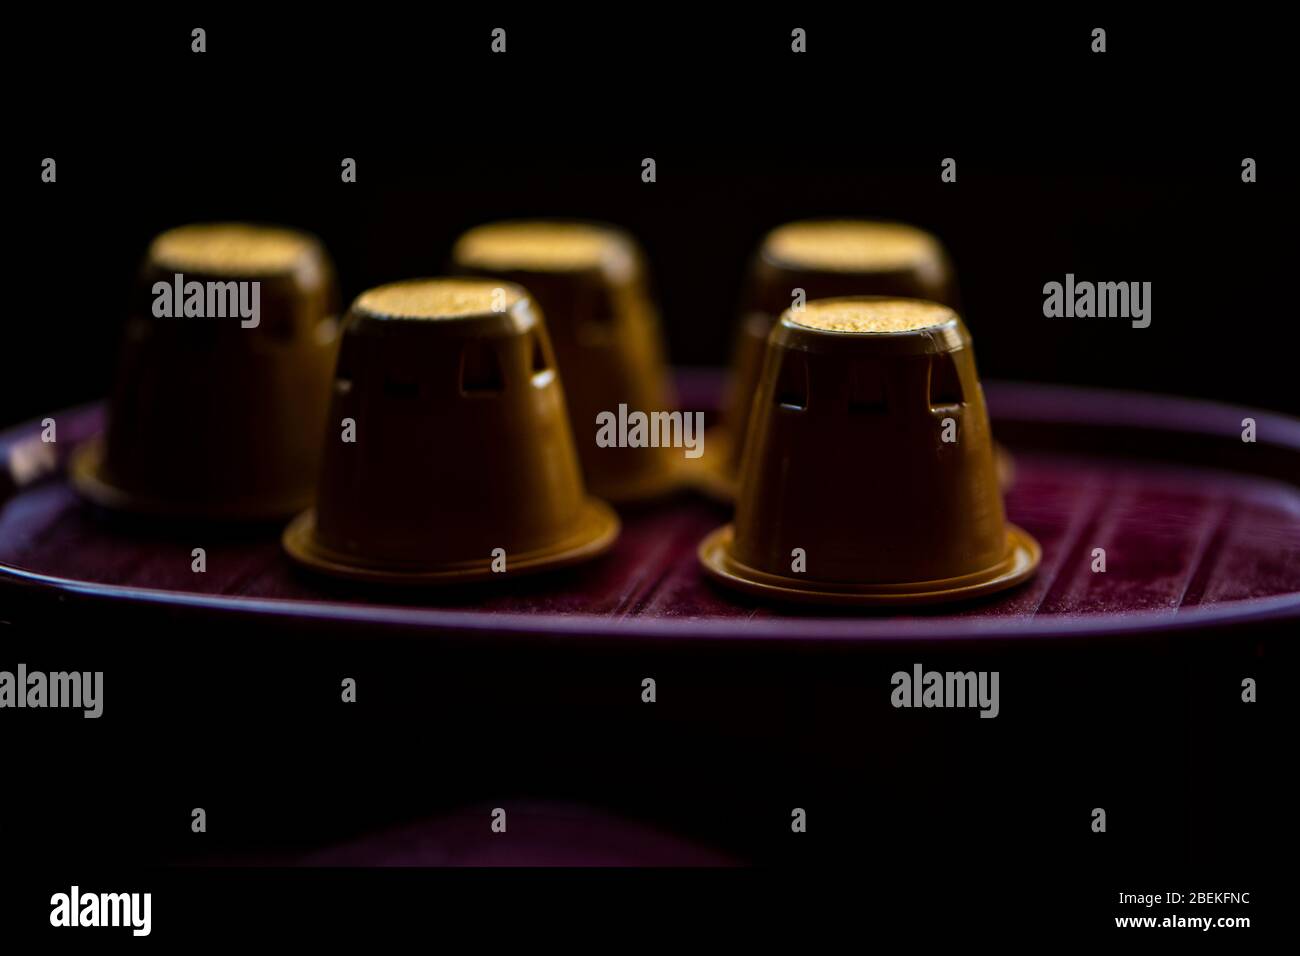 nespresso cofee pods on a kitchen aid coffee maker Stock Photo